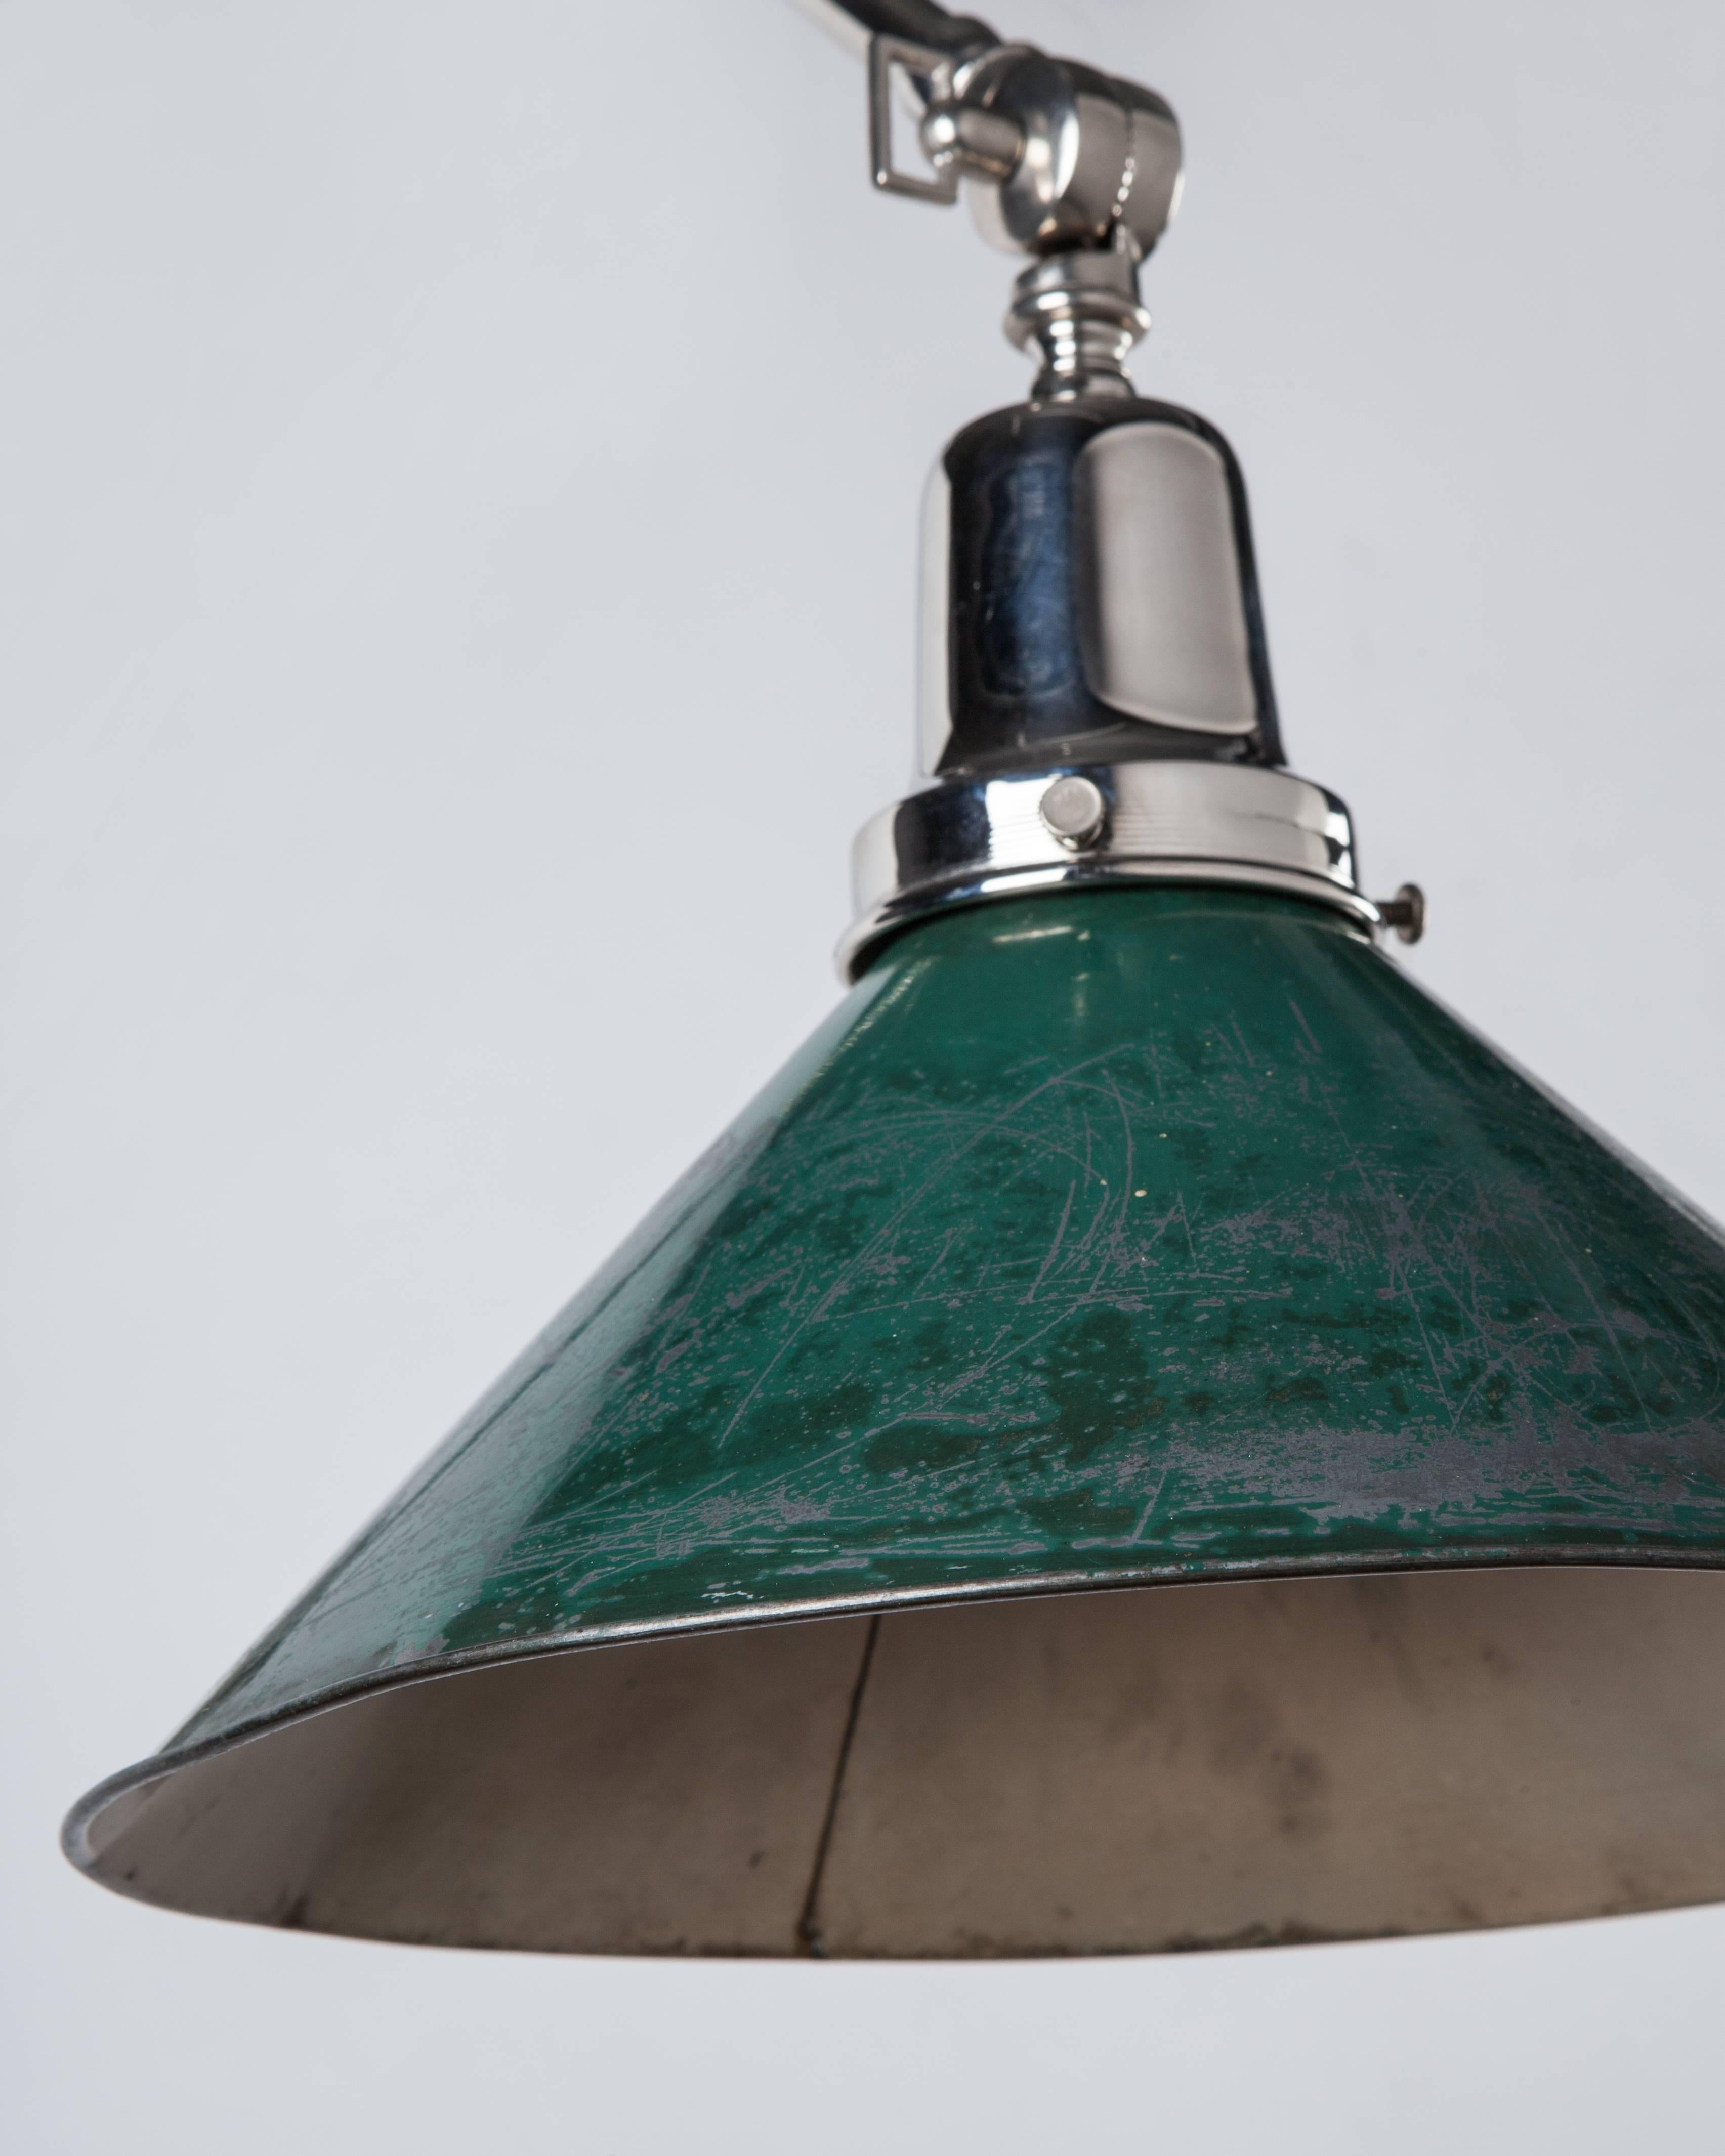 AIS2937
An articulated sconce having an industrial tin shade in its original worn painted finish. On polished nickel fittings custom-made in the Remains Lighting workshop.

Dimensions:
Overall (extended): 8-3/4